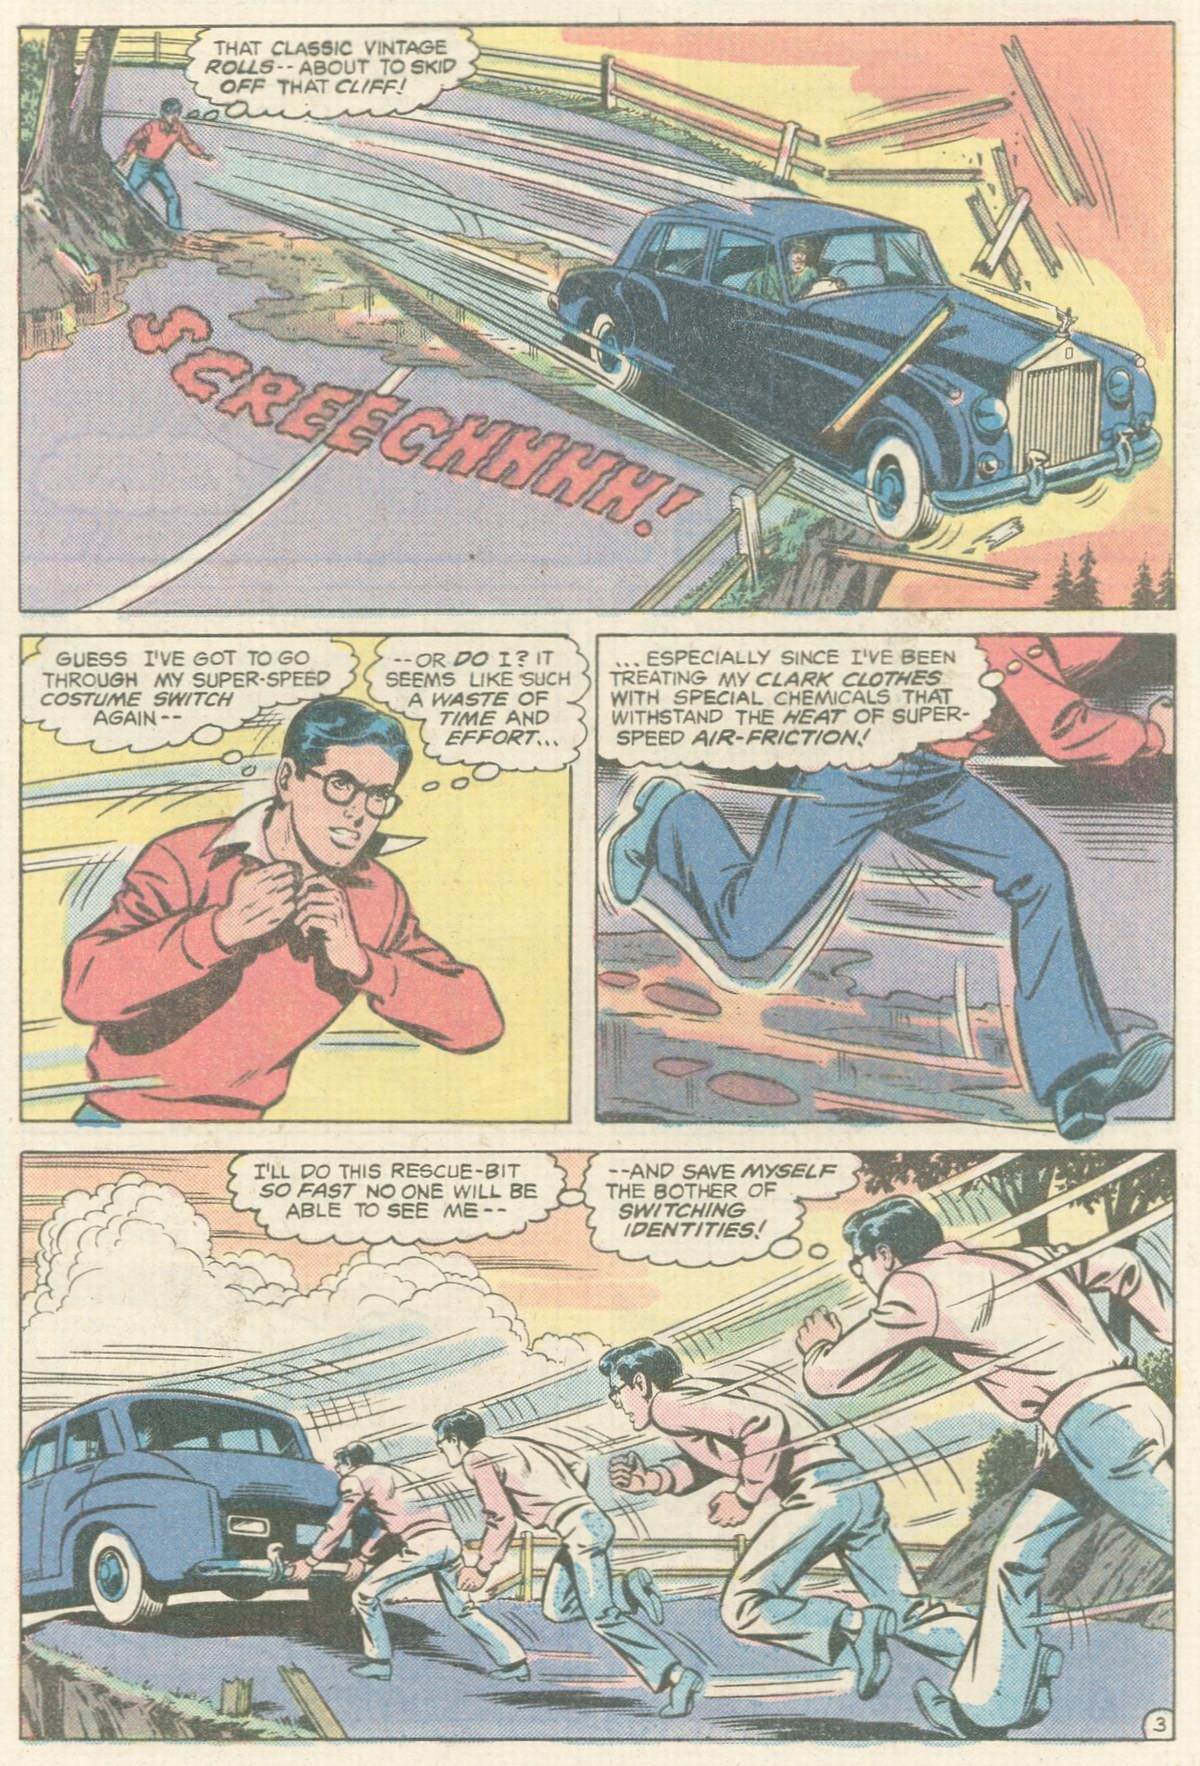 The New Adventures of Superboy 12 Page 3